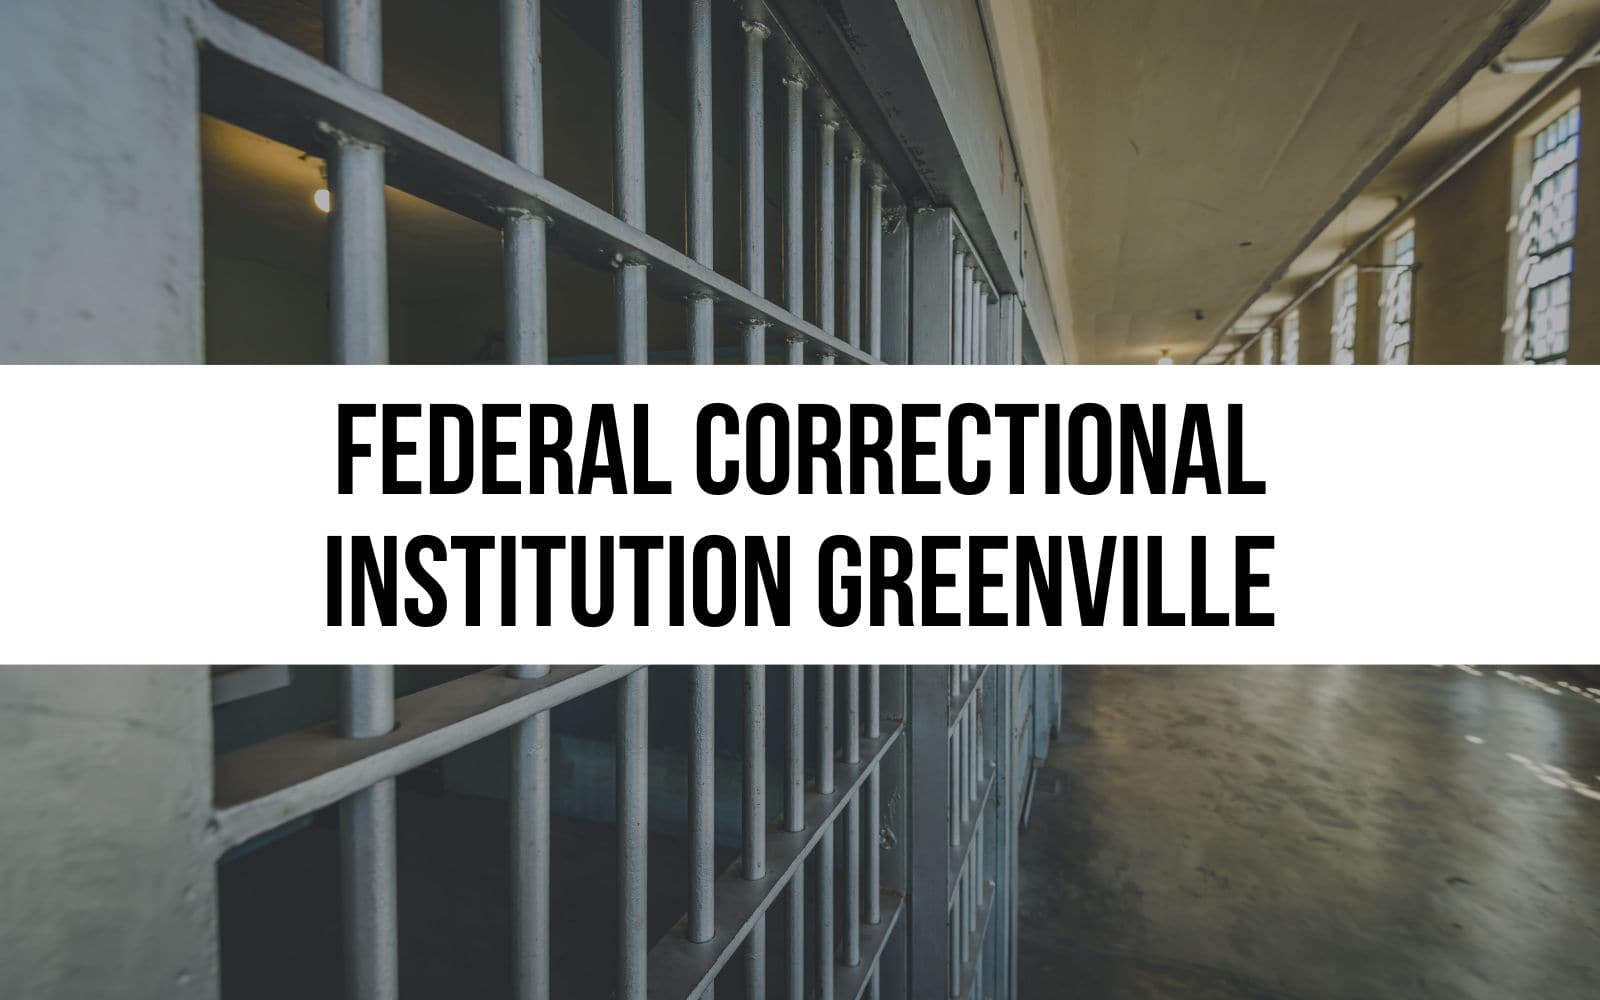 Federal Correctional Institution Greenville